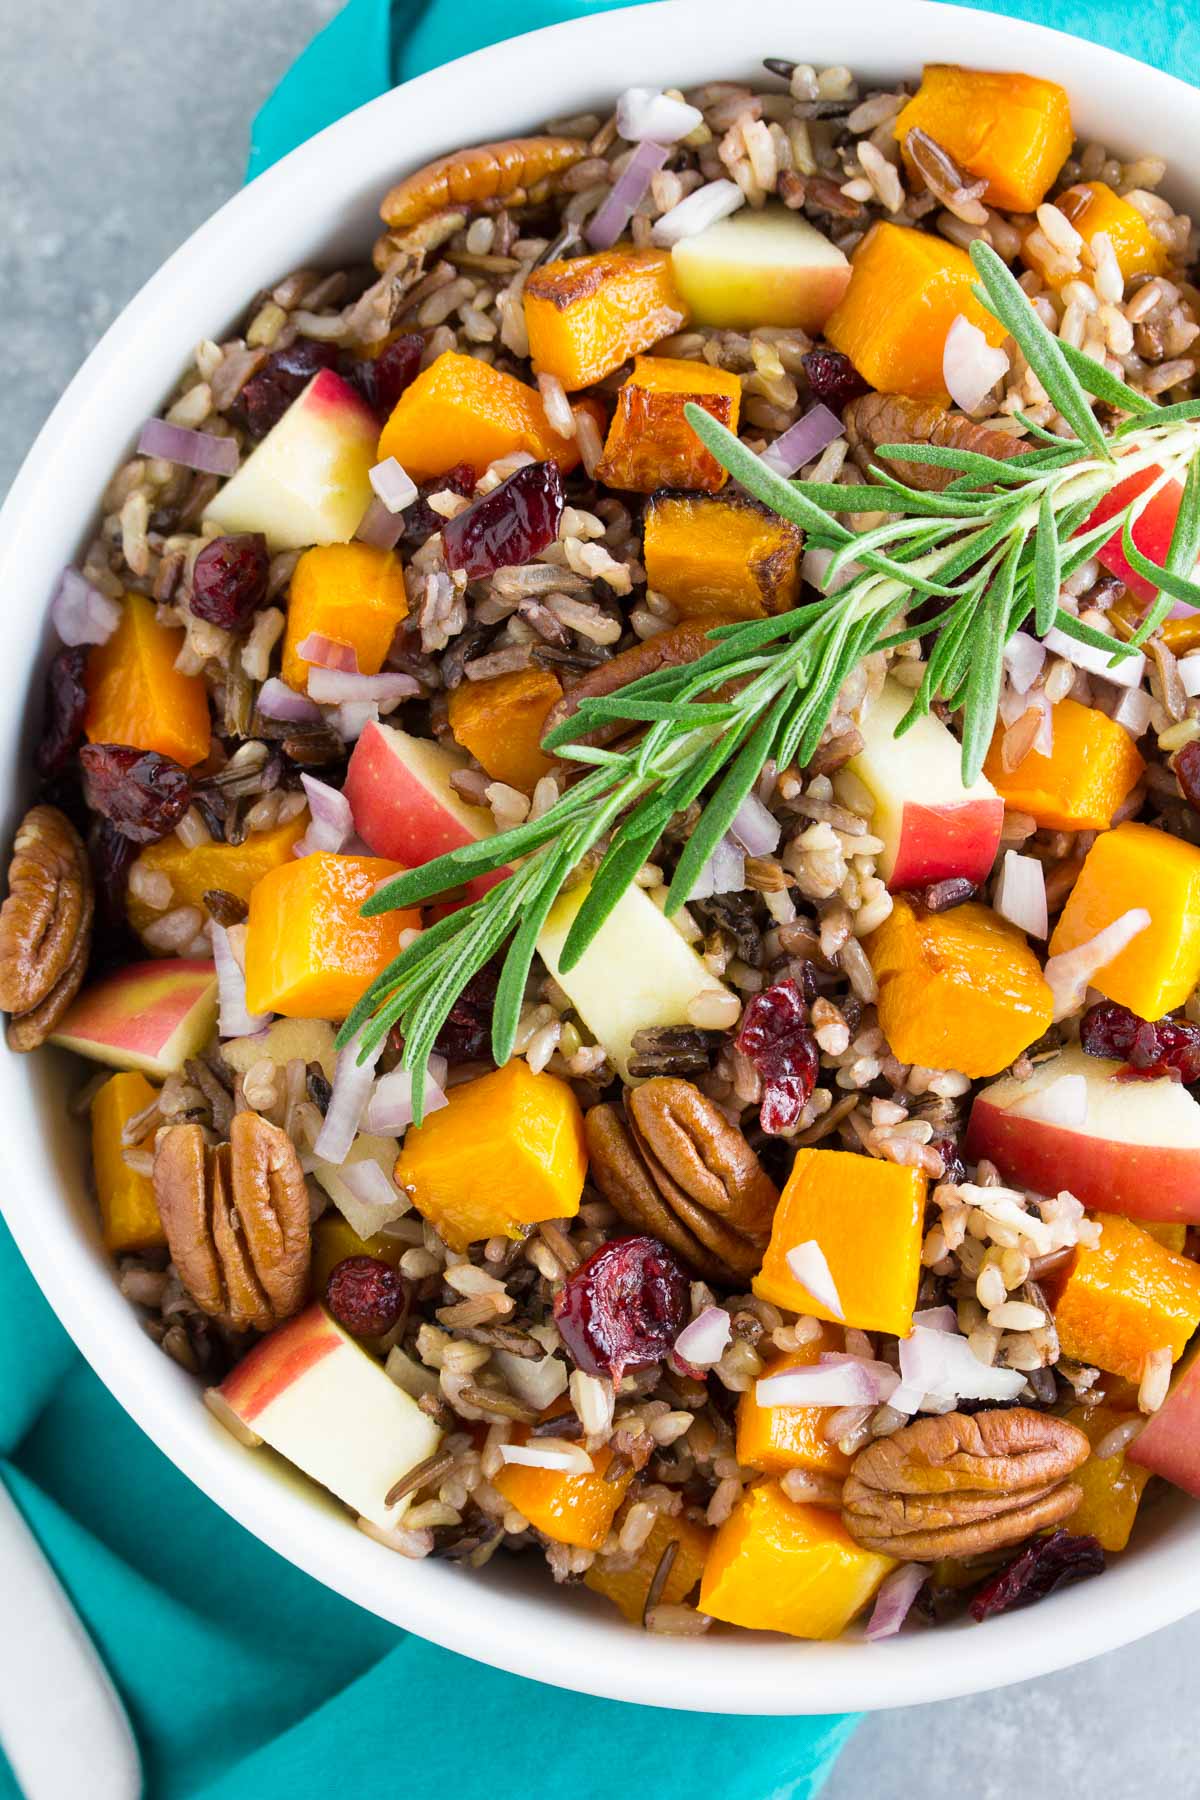 Wild rice salad with roasted butternut squash, apple, cranberries and apple cider dressing in white bowl.